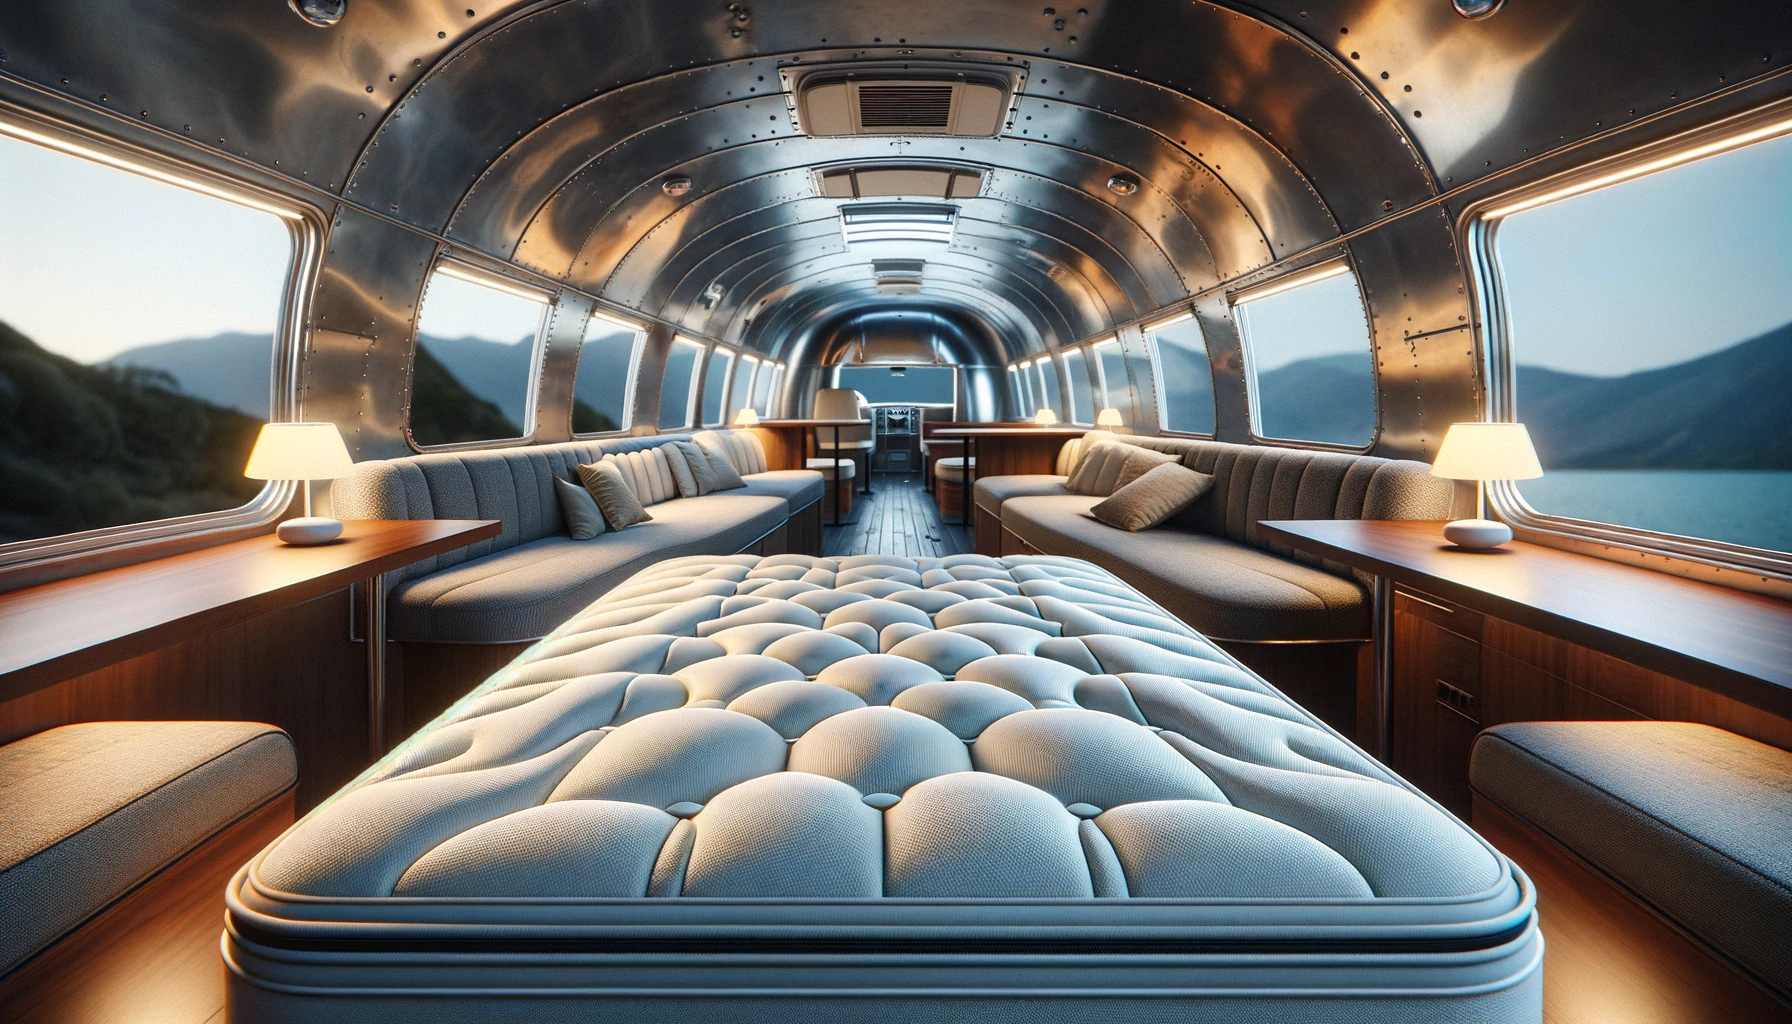 An inviting and stylish interior of an Airstream caravan showcasing a luxurious mattress, fitting seamlessly into the caravan's unique curved design, symbolizing both comfort and adventure on the open road.